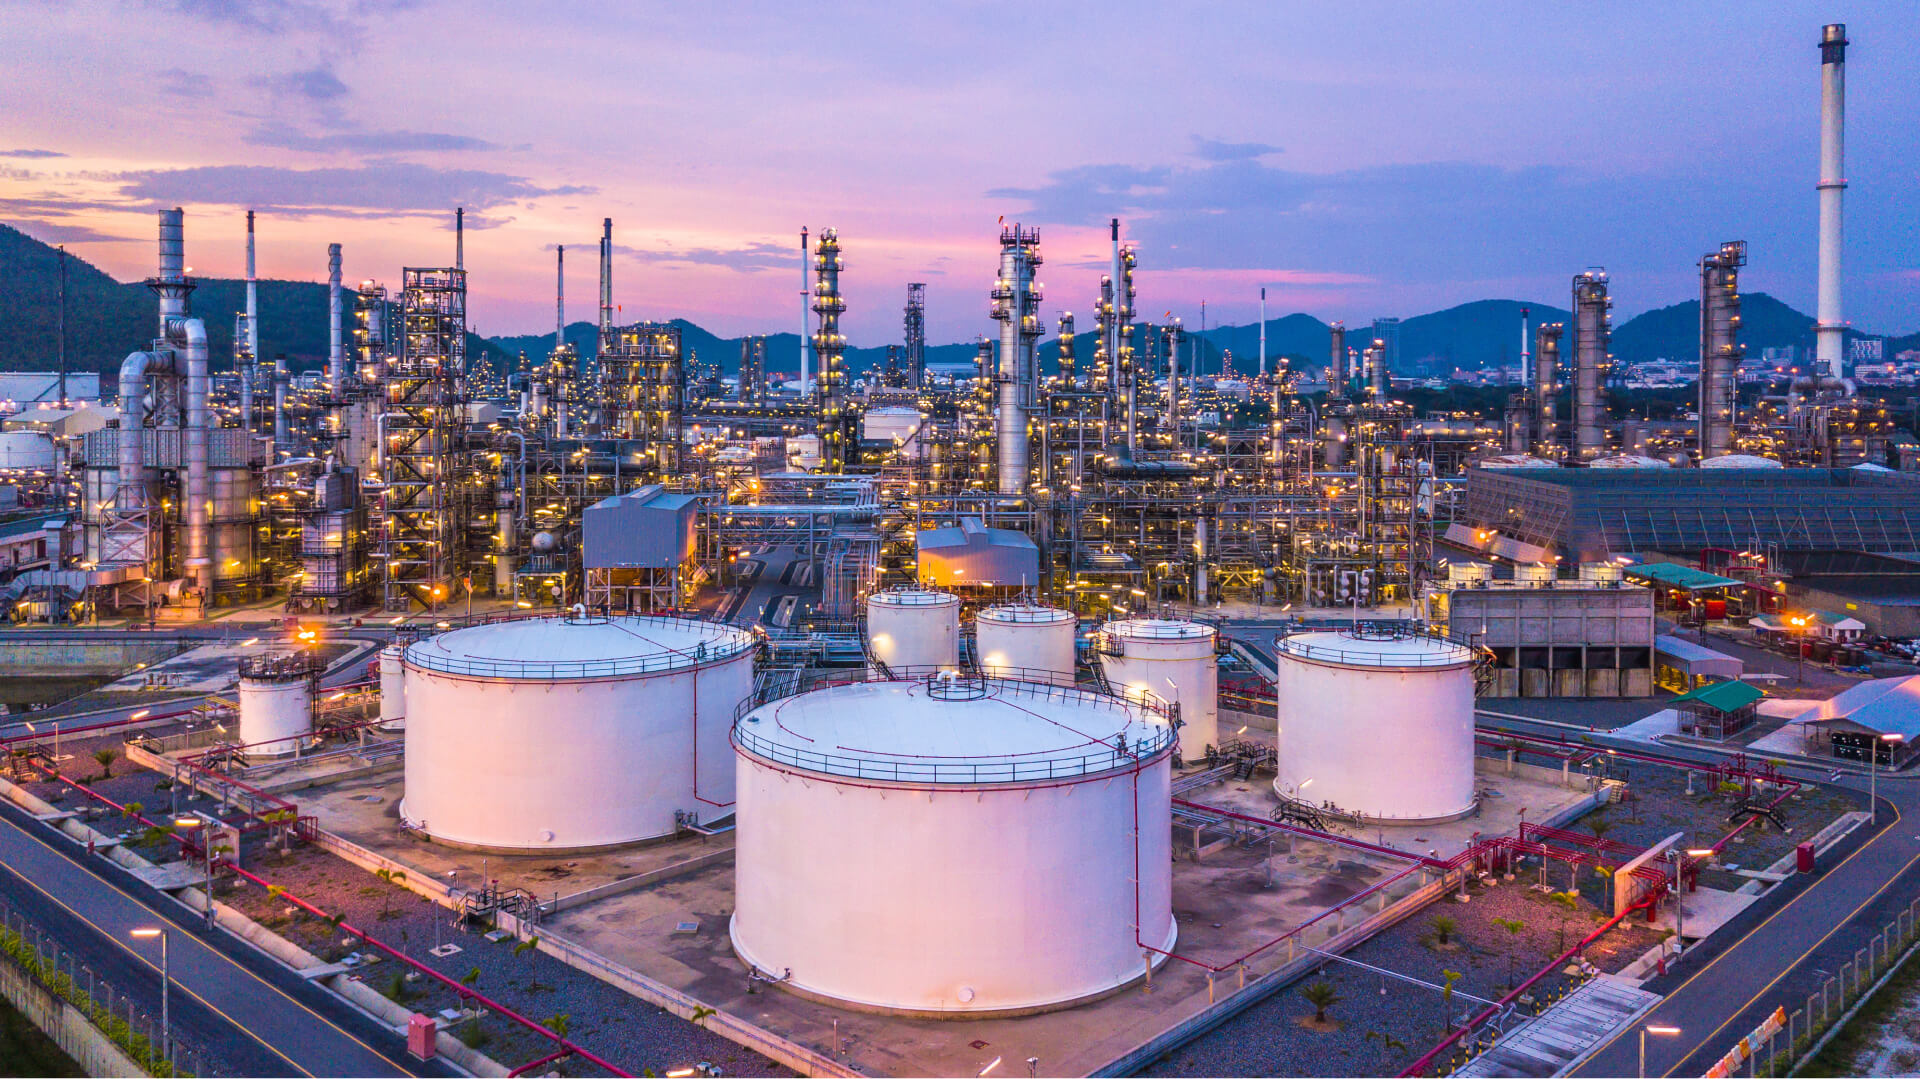 Aerial view of oil and gas chemical tanks with petrochemical processing plant background at twilight.